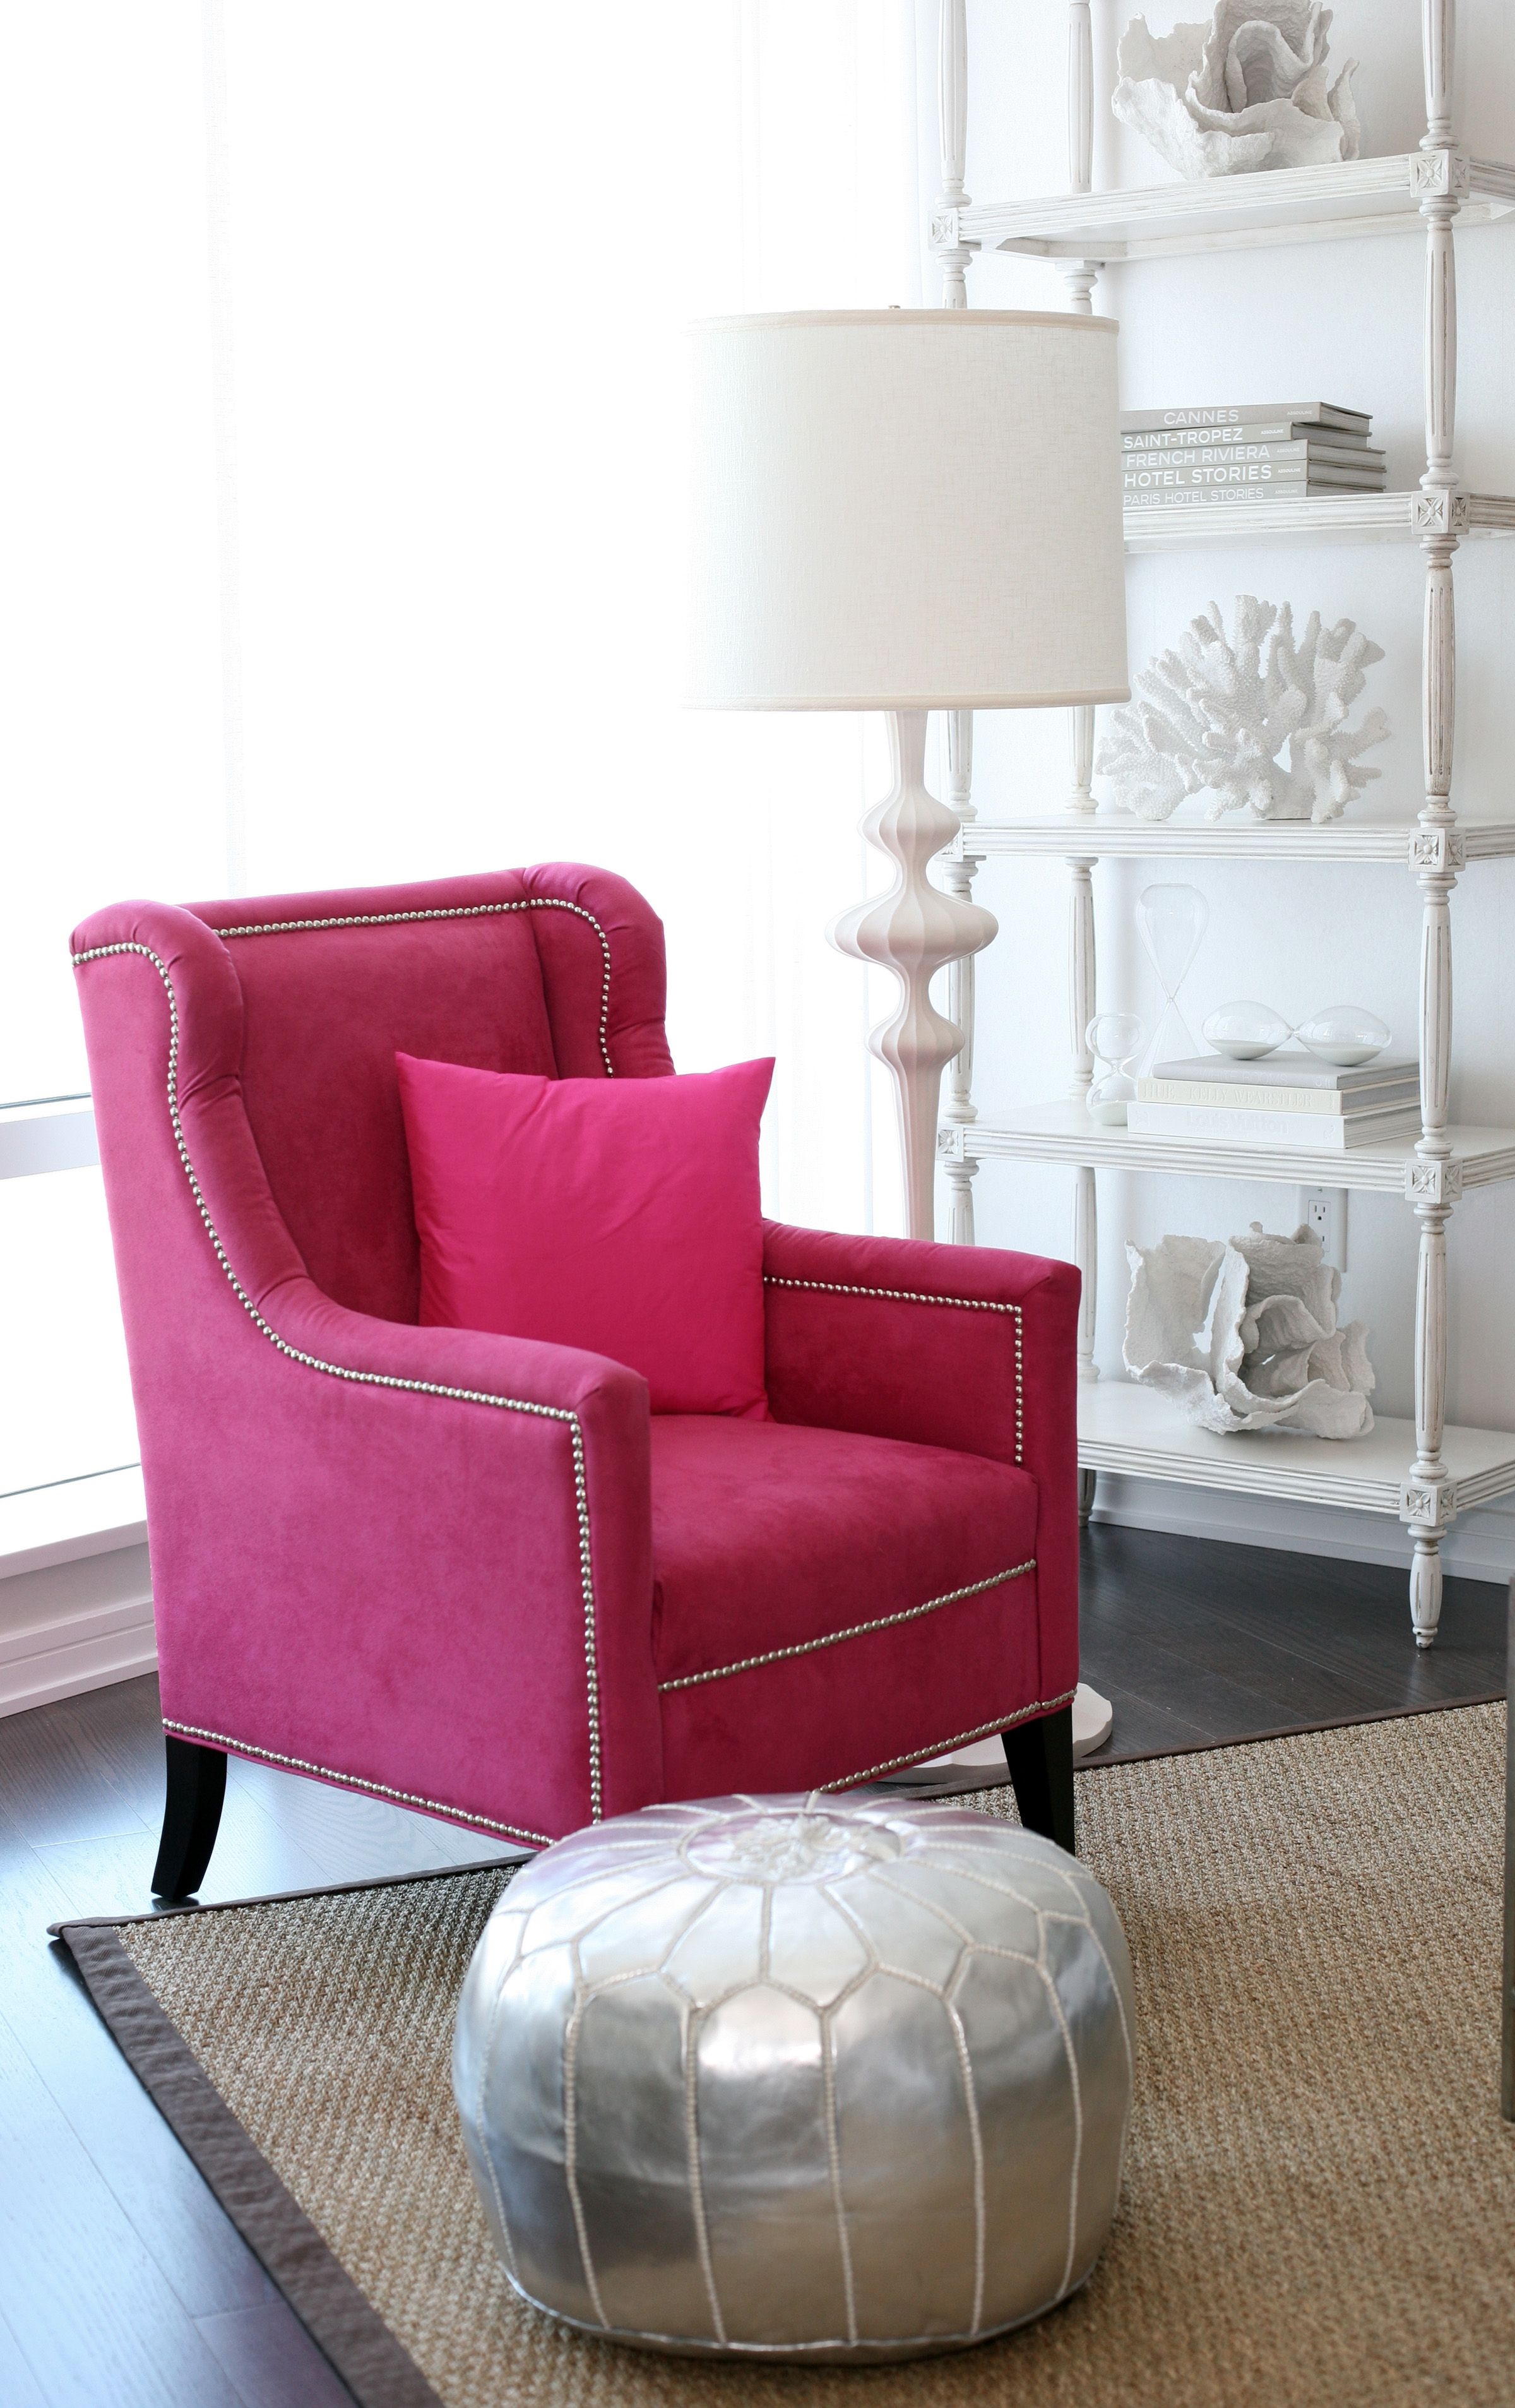 Hot pink dining chairs